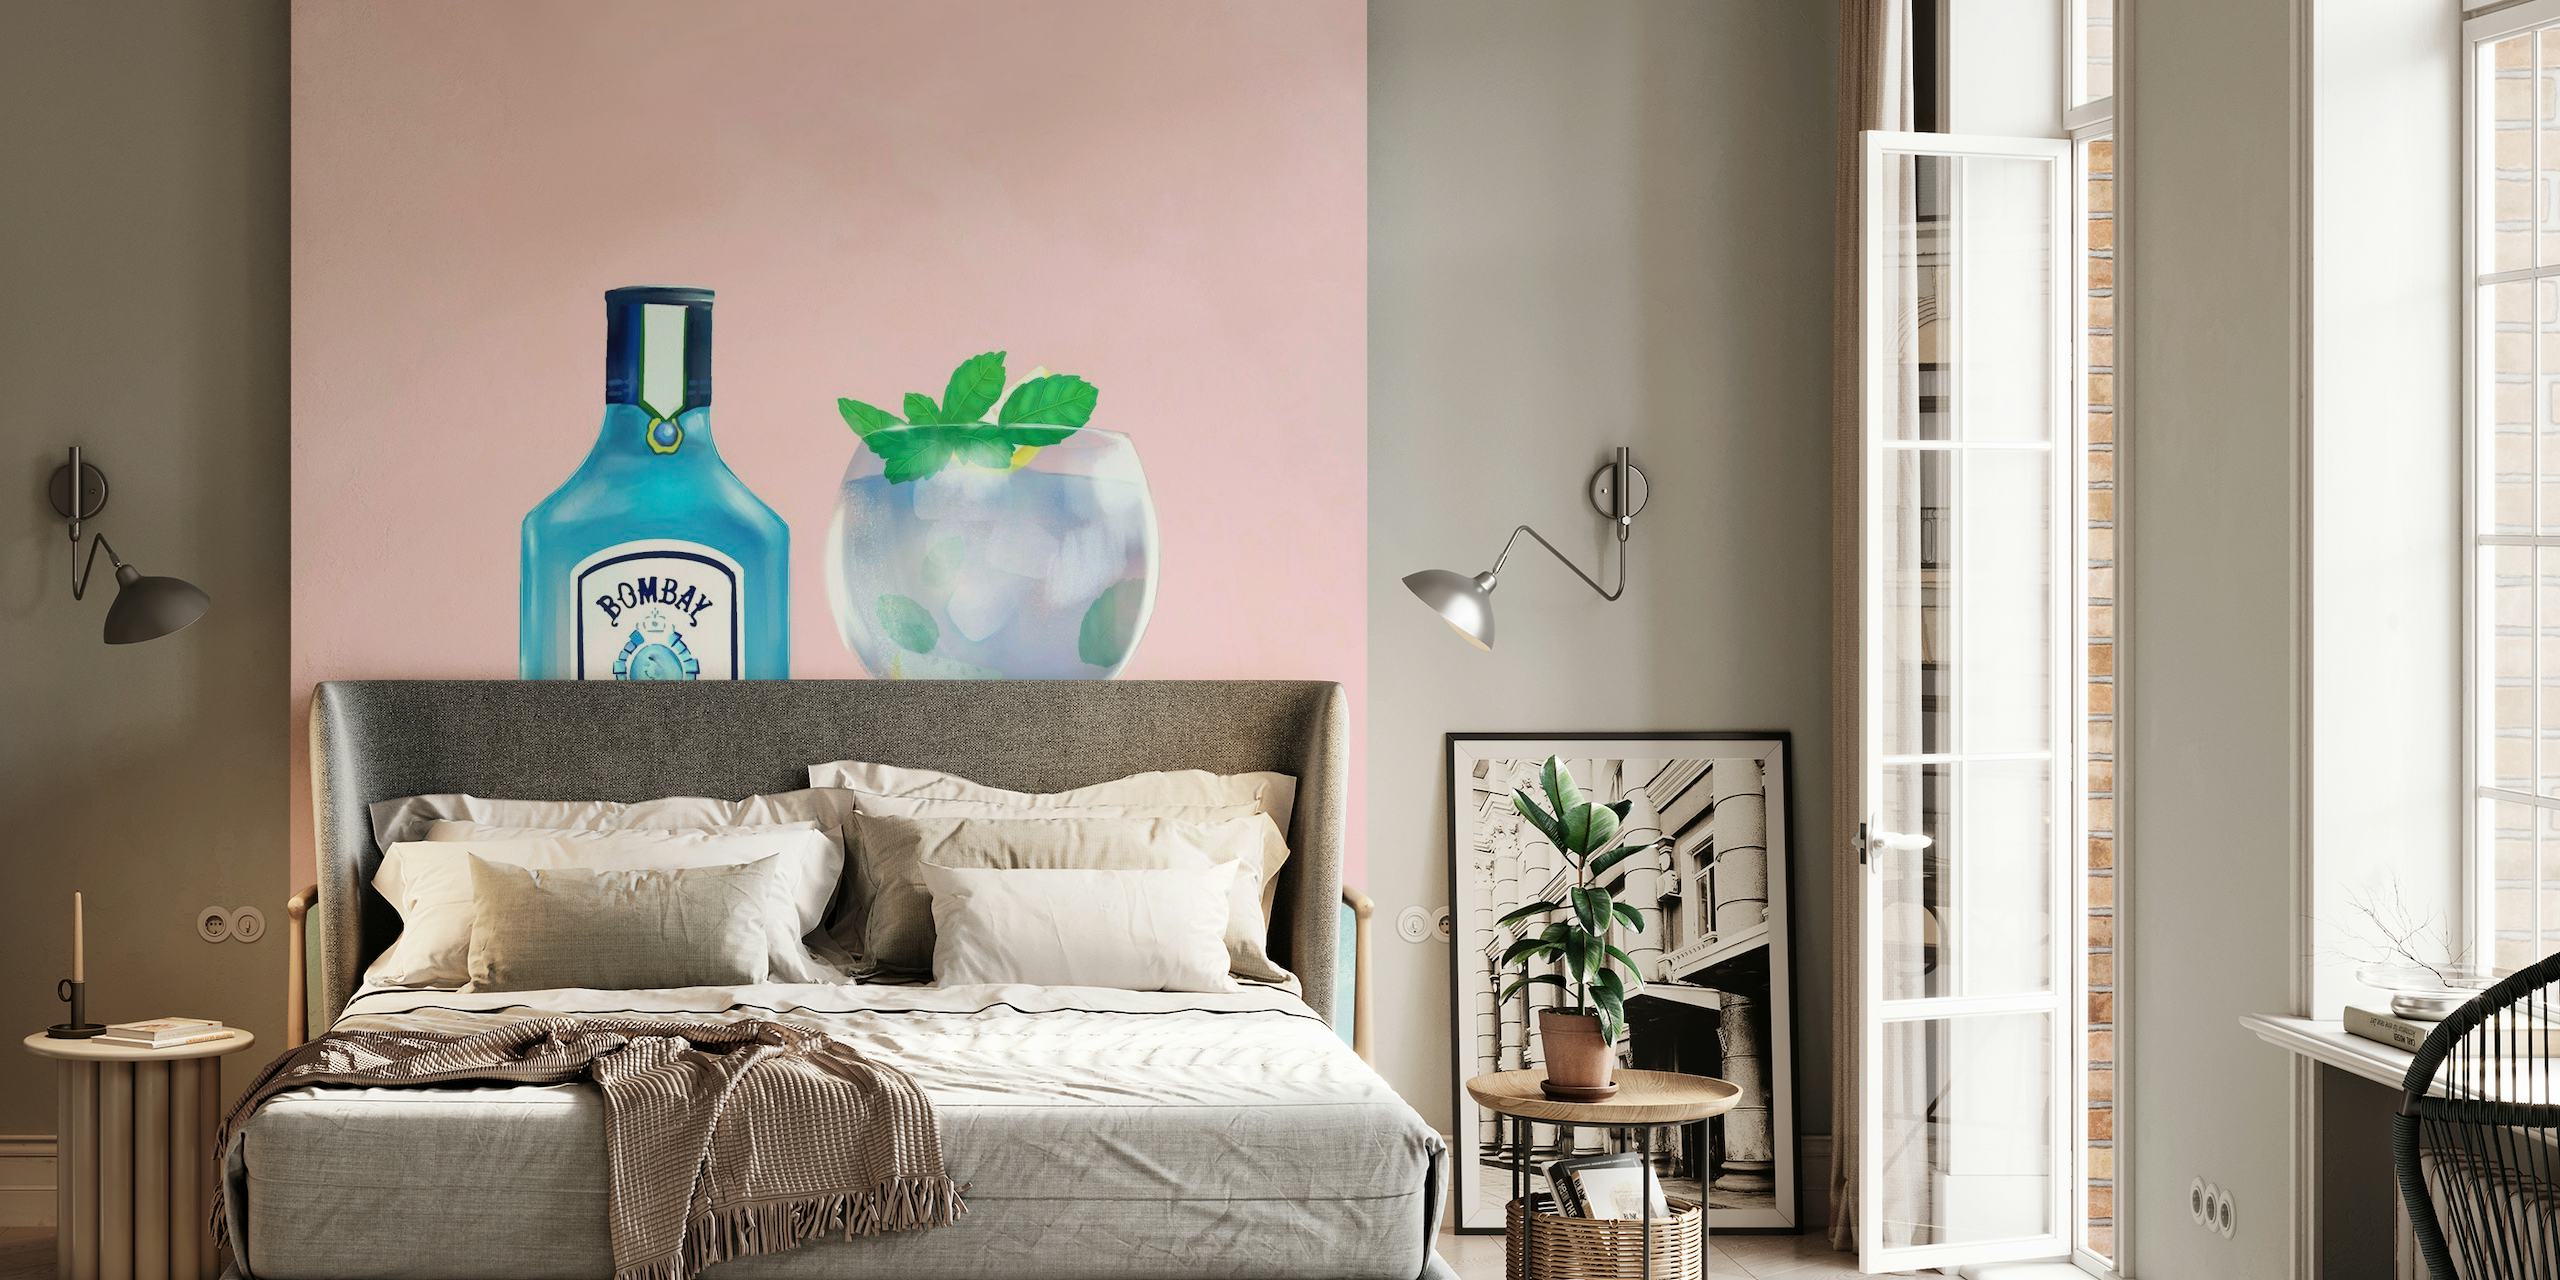 Gin bottle and cocktail glass wall mural with lemon and mint accents on a soft pink background